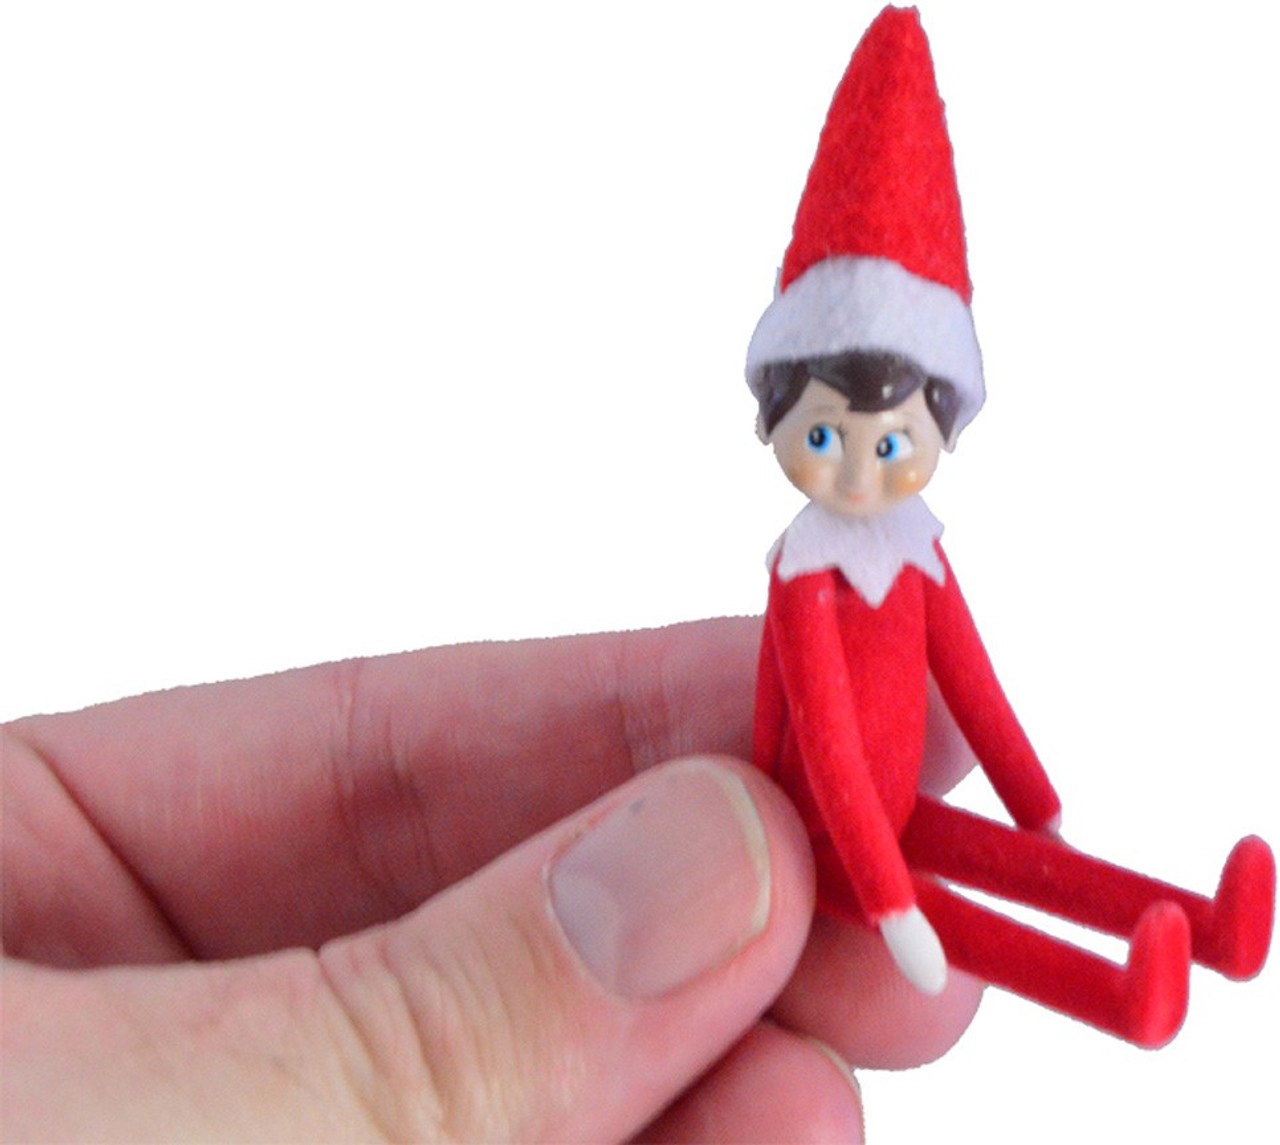 Worlds Smallest Elf on the Shelf - Christmas Toy